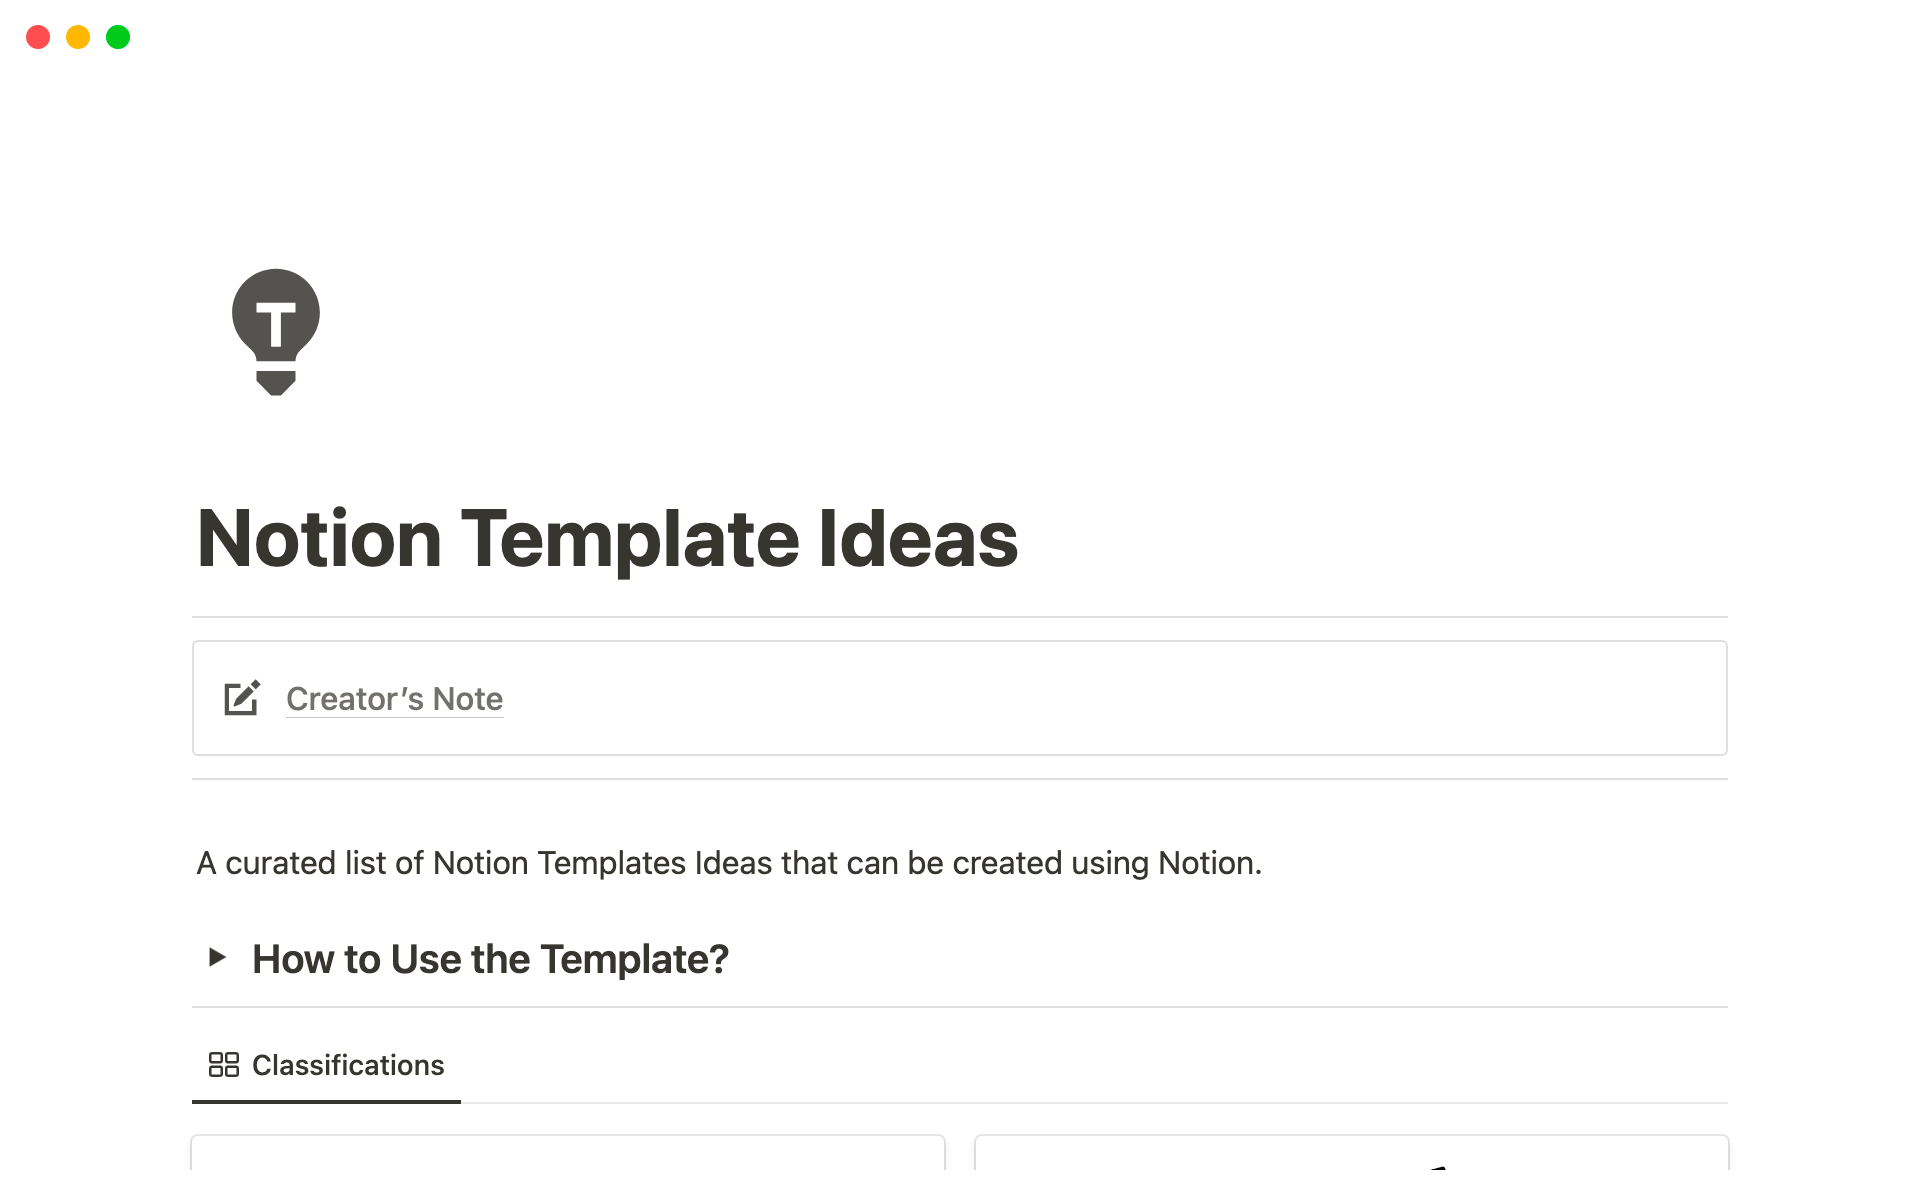 Unlock the full potential of Notion with our expertly crafted template ideas just for you!